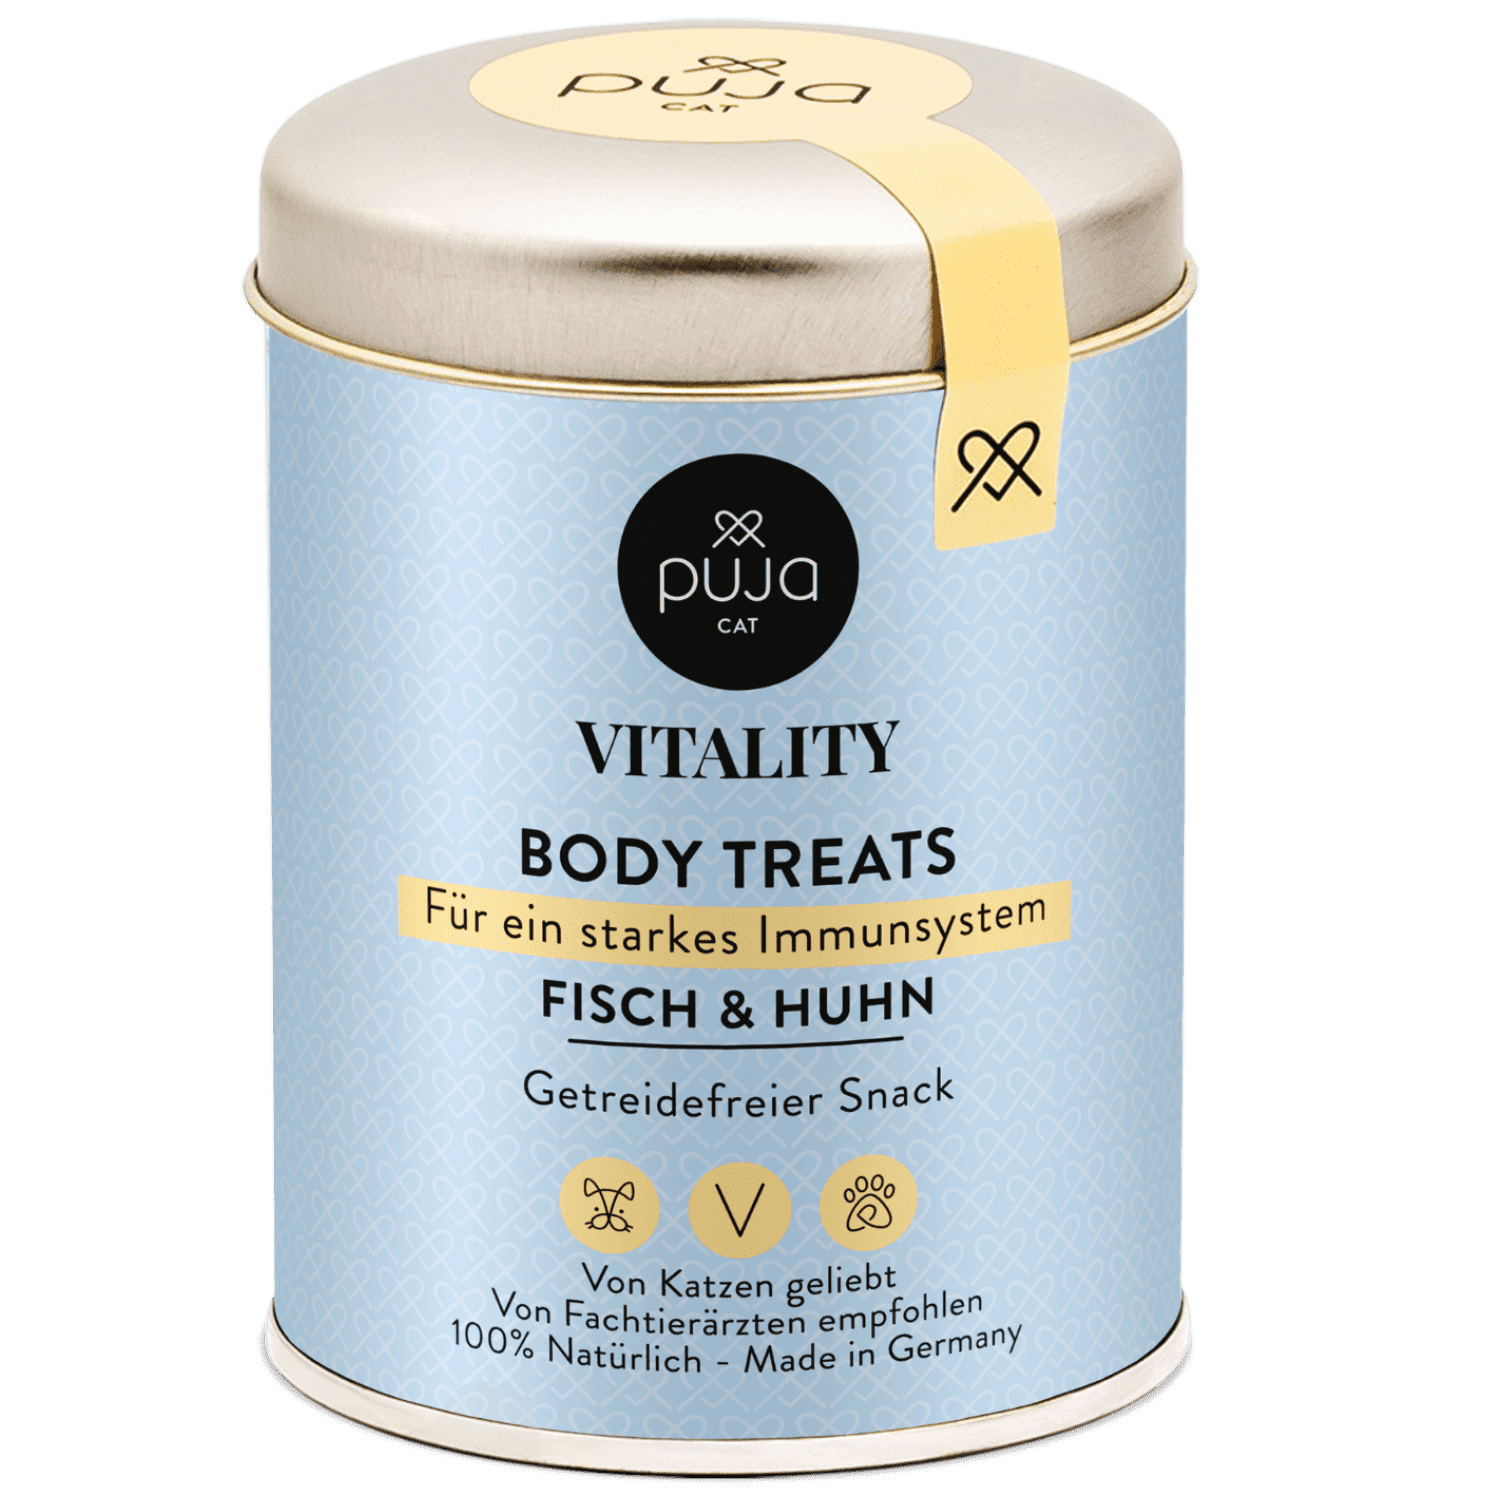 Vitality Body Treats for cats - delicious immune system booster 150g